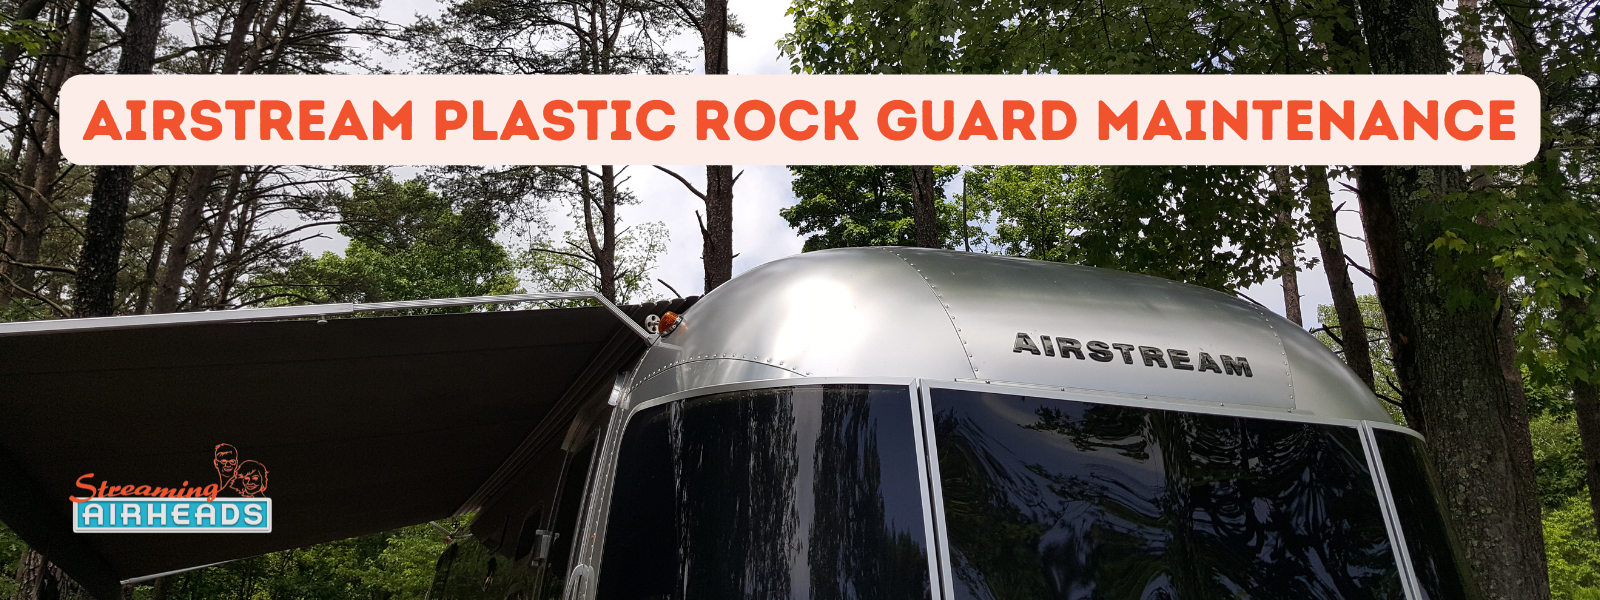 maintenance on your airstream plastic rock guards